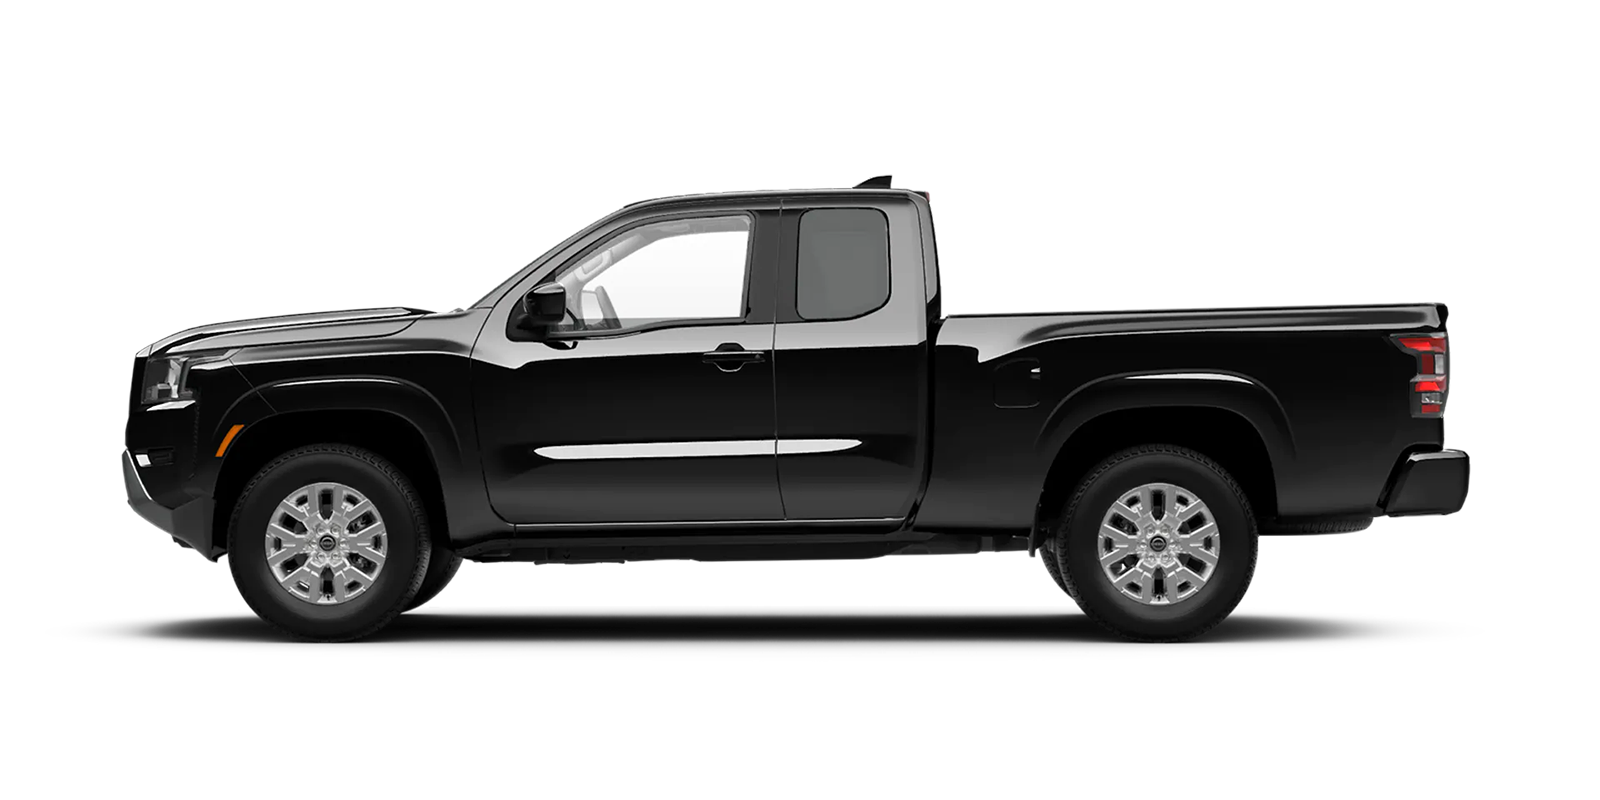 2022 Frontier King Cab SV 4x2 in Super Black | Nationwide Nissan in Timonium MD